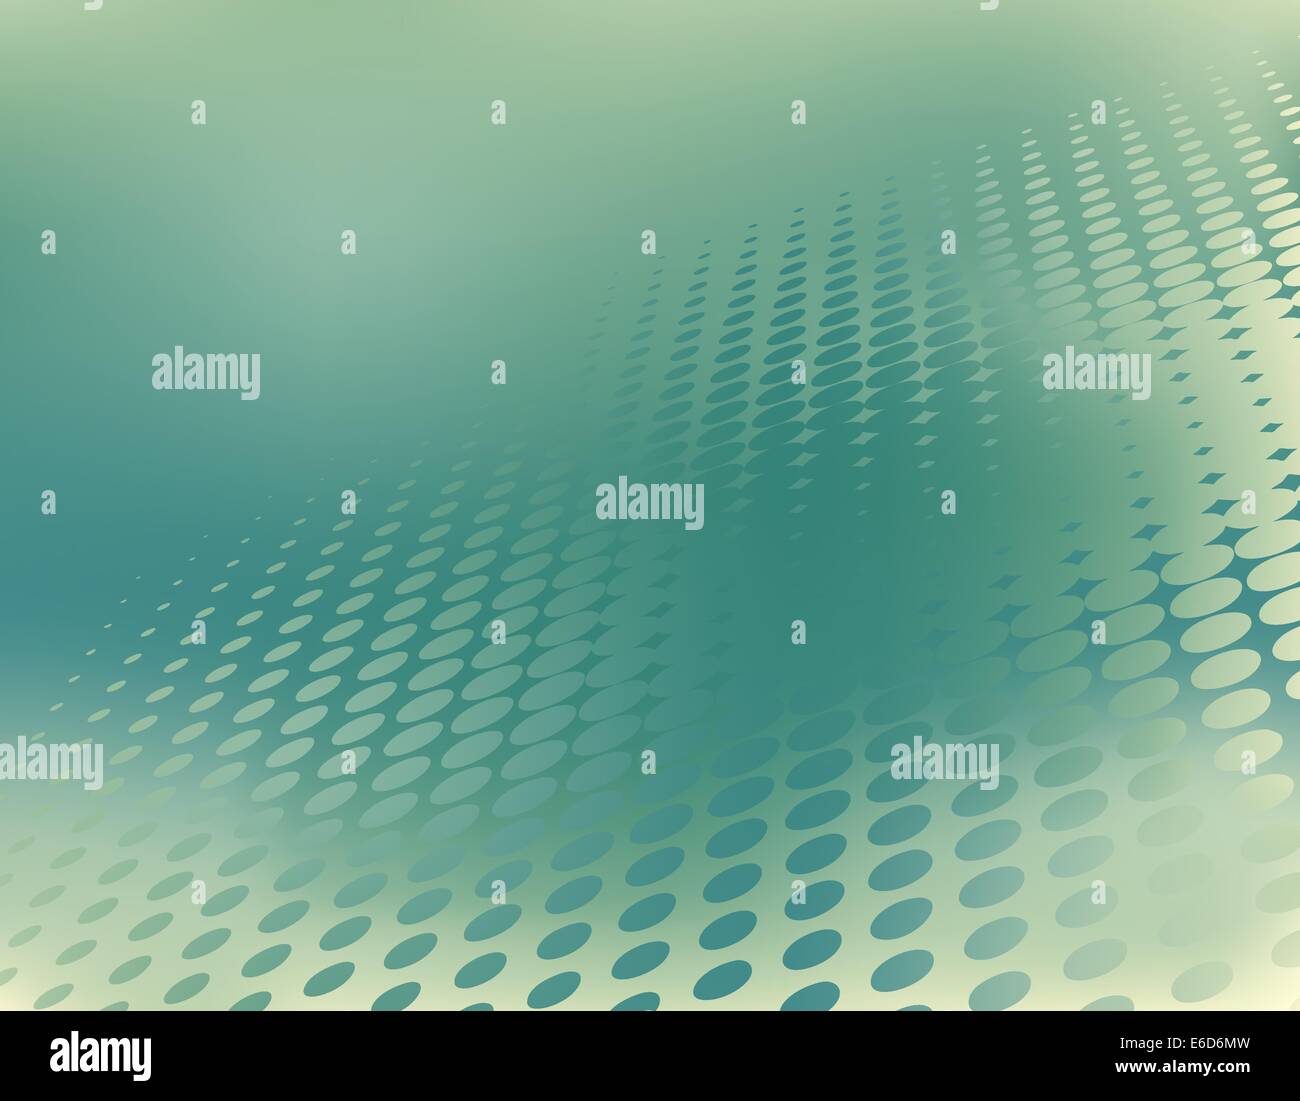 Abstract editable vector illustration of a green halftone pattern Stock Vector